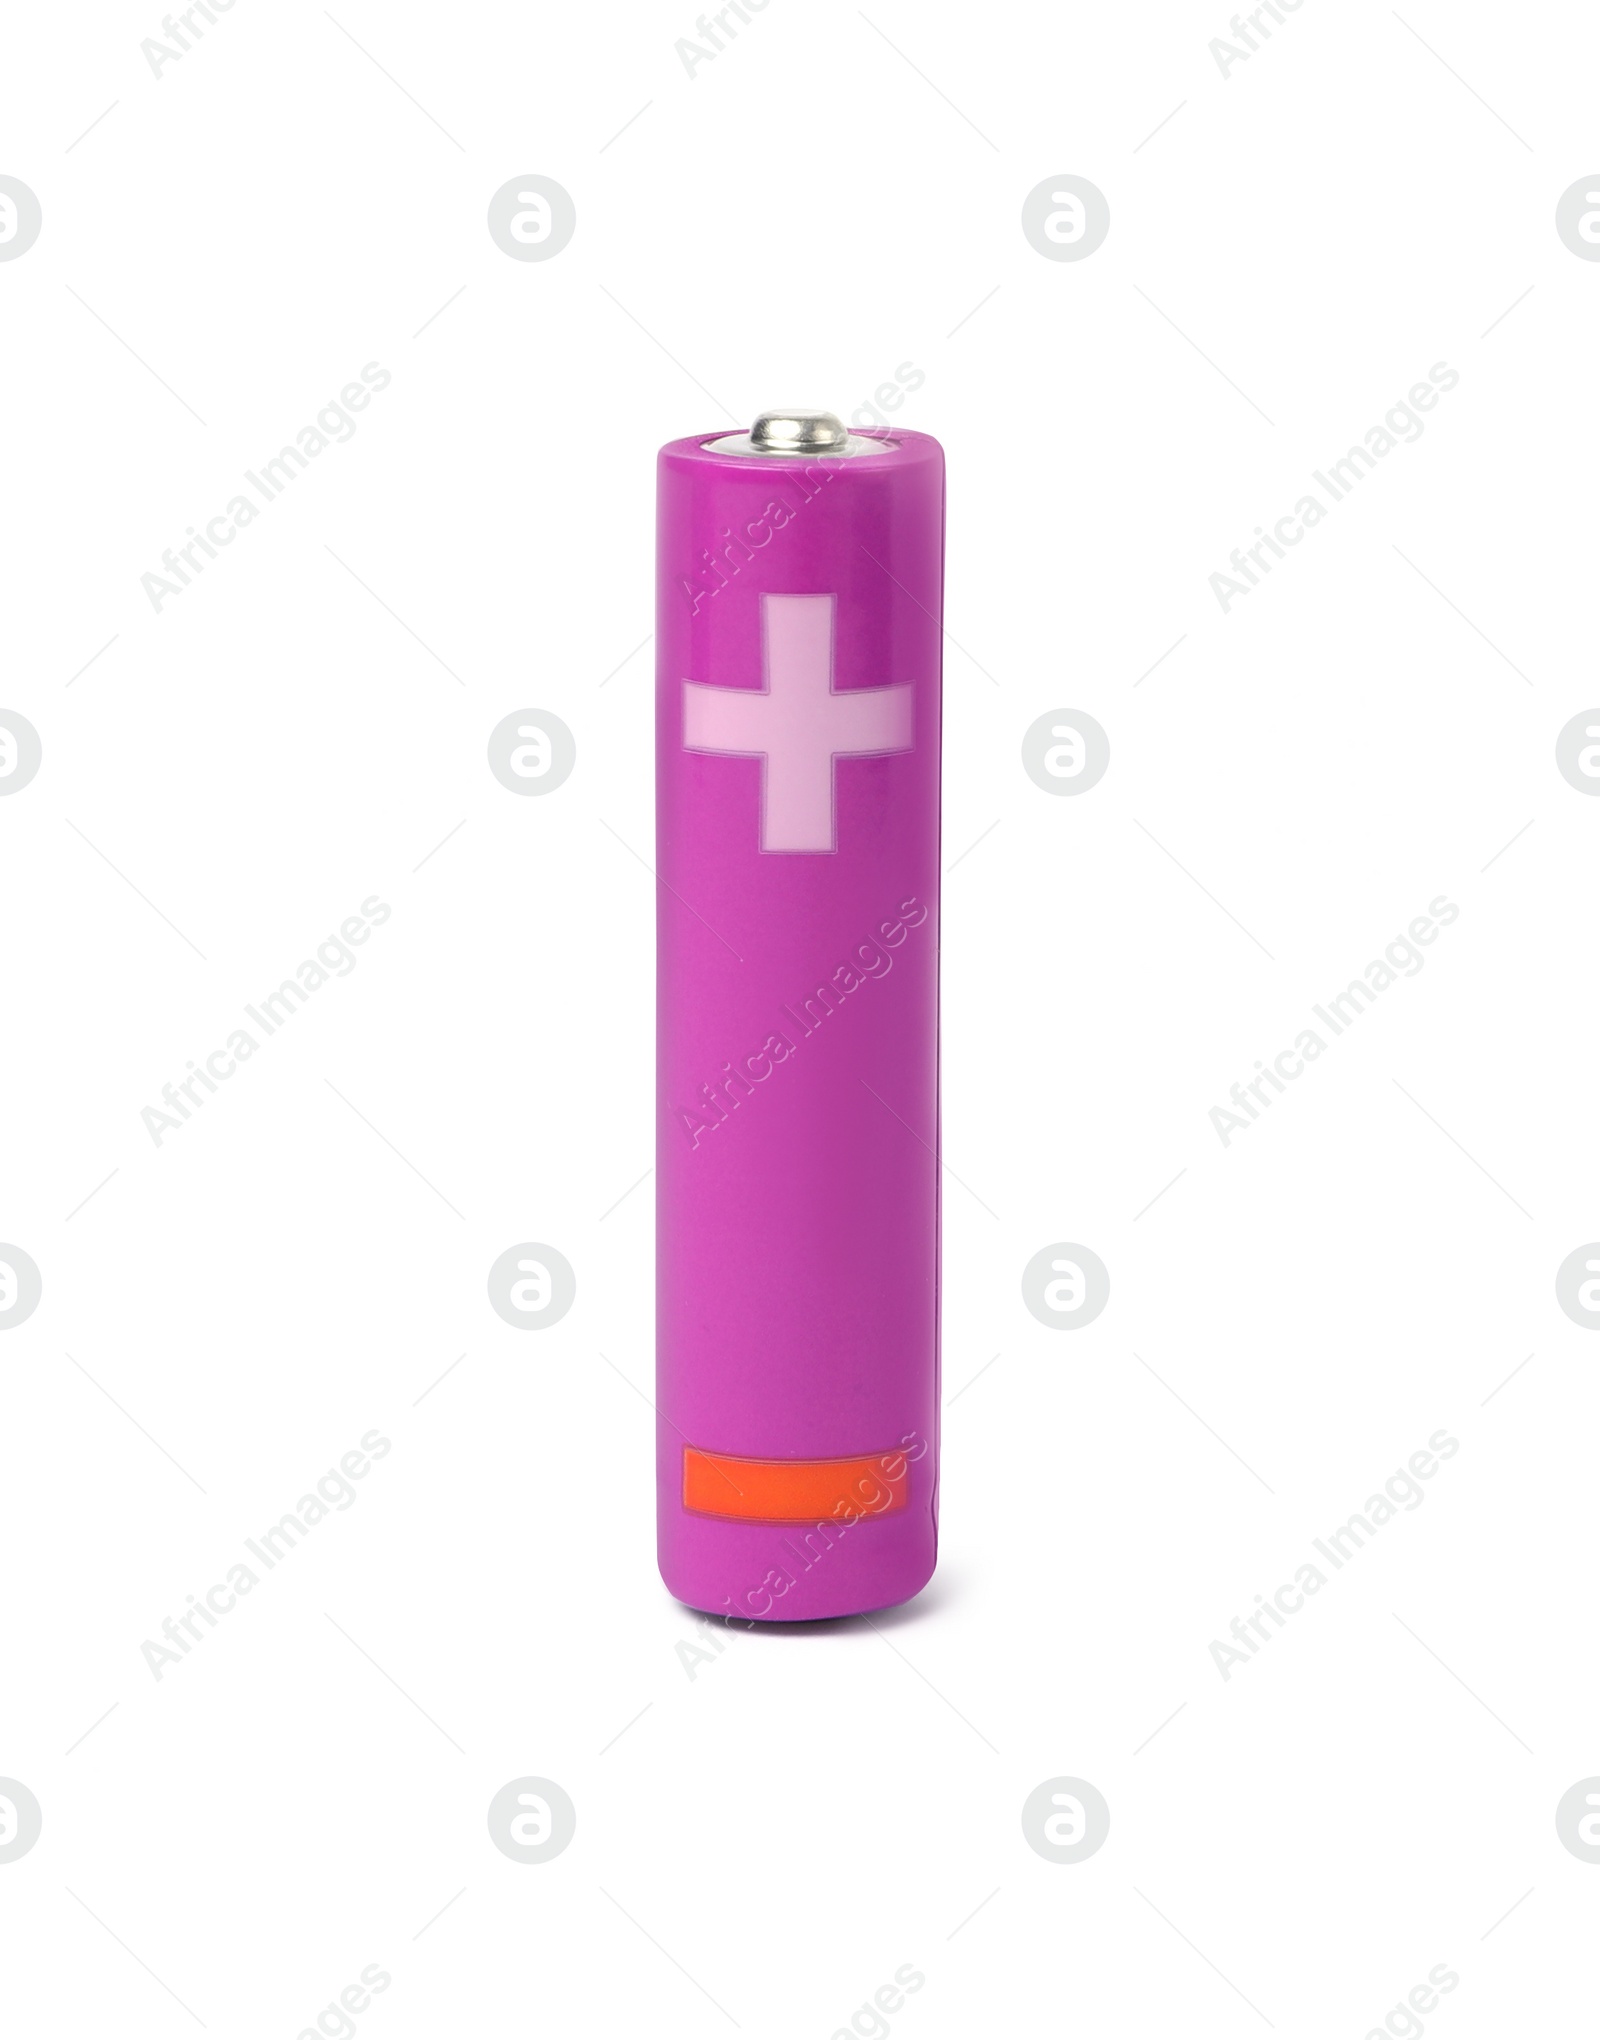 Photo of New AAA size battery isolated on white